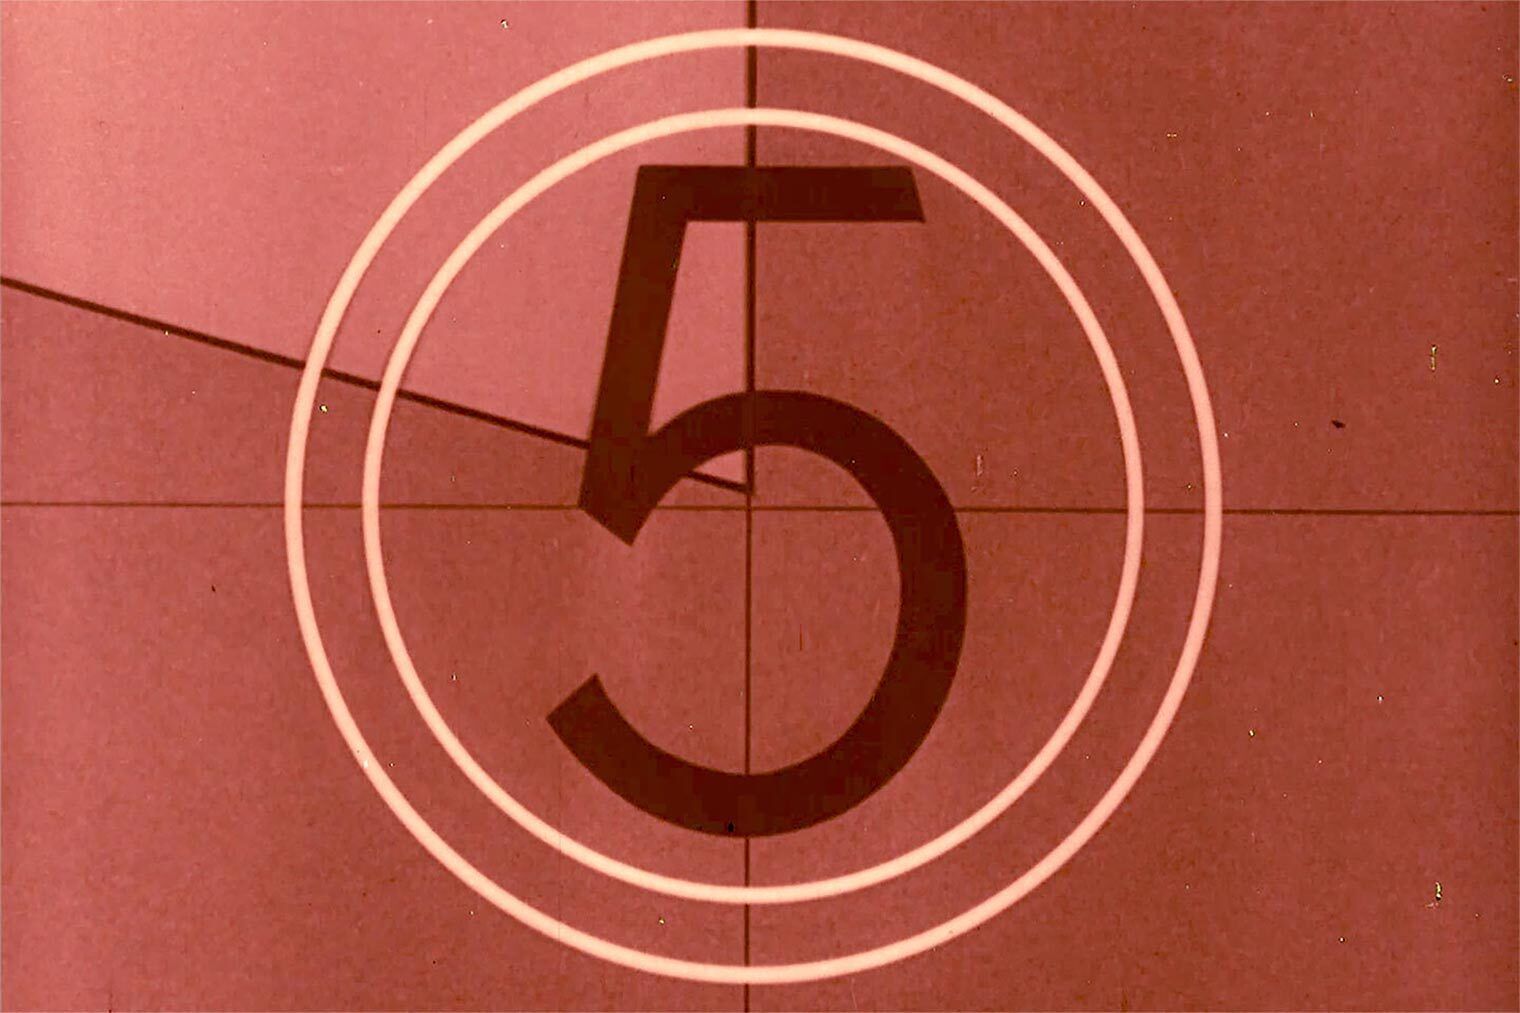 A red countdown starting at the number 5